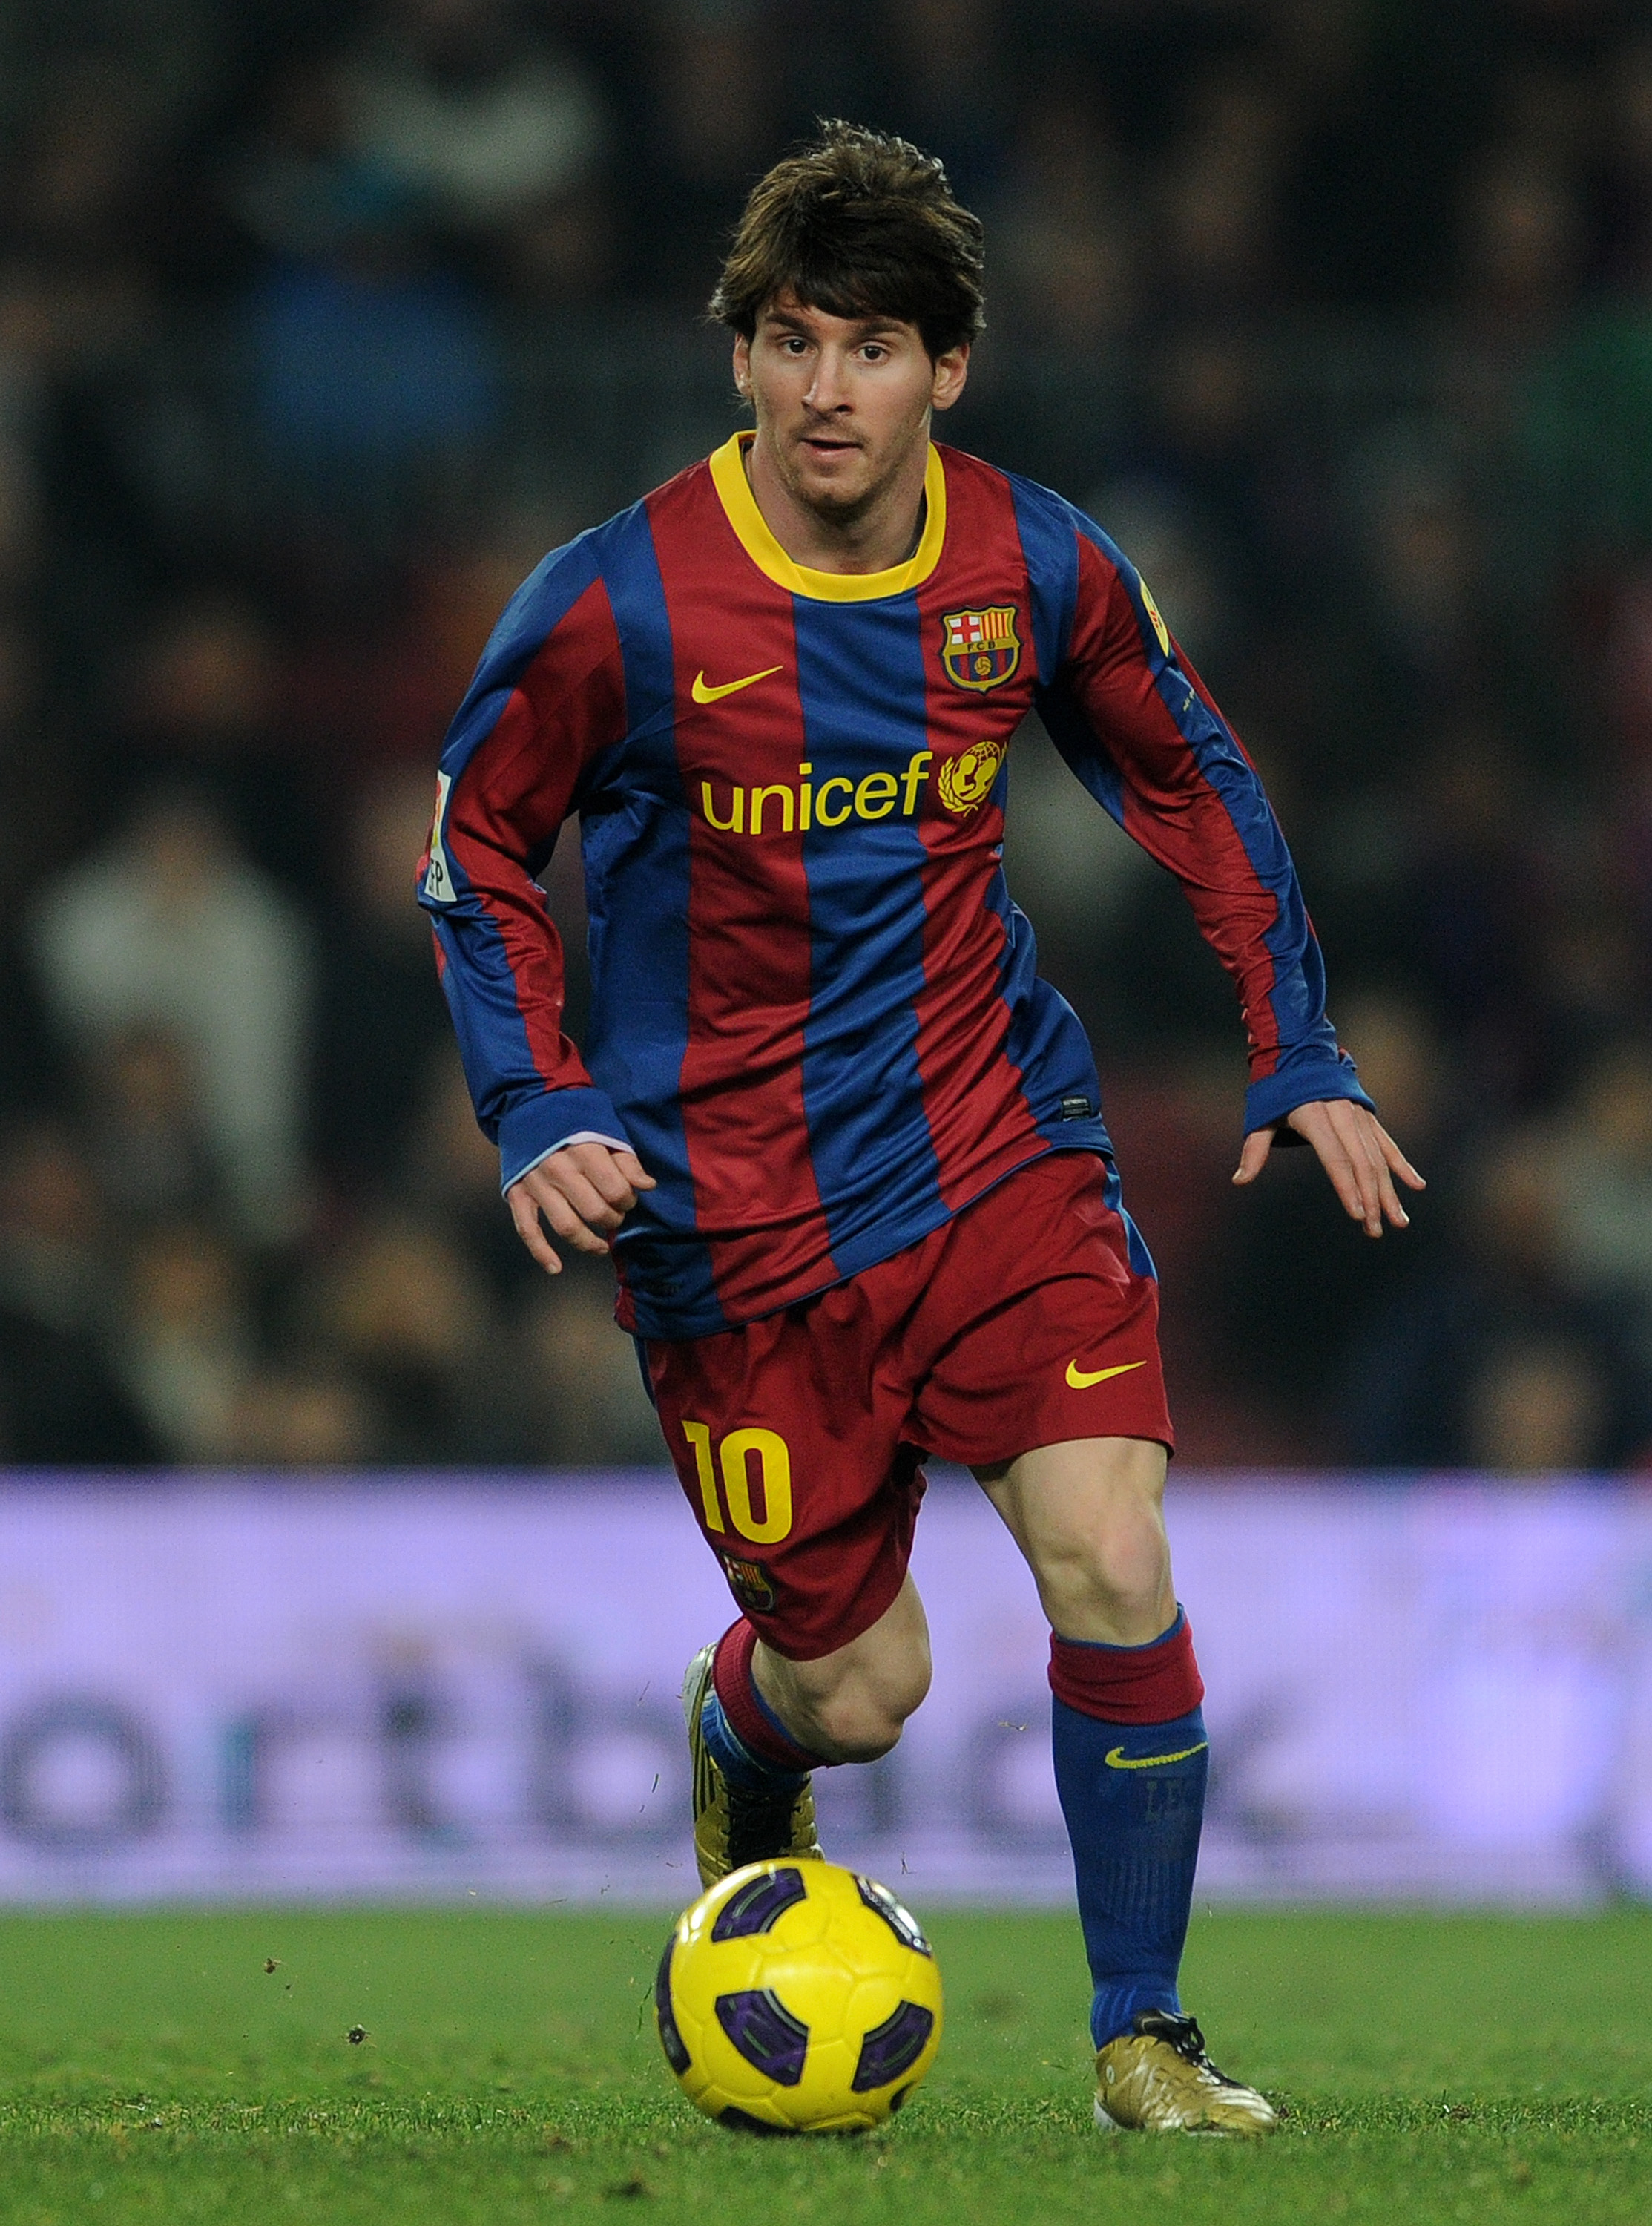 BARCELONA, SPAIN - DECEMBER 21:  Lionel Messi of Barcelona runs with the ball during the round of last 16 Copa del Rey match between FC Barcelona and Athletic Bilbao at the Camp Nou stadium on December 21, 2010 in Barcelona, Spain.  (Photo by Jasper Juine